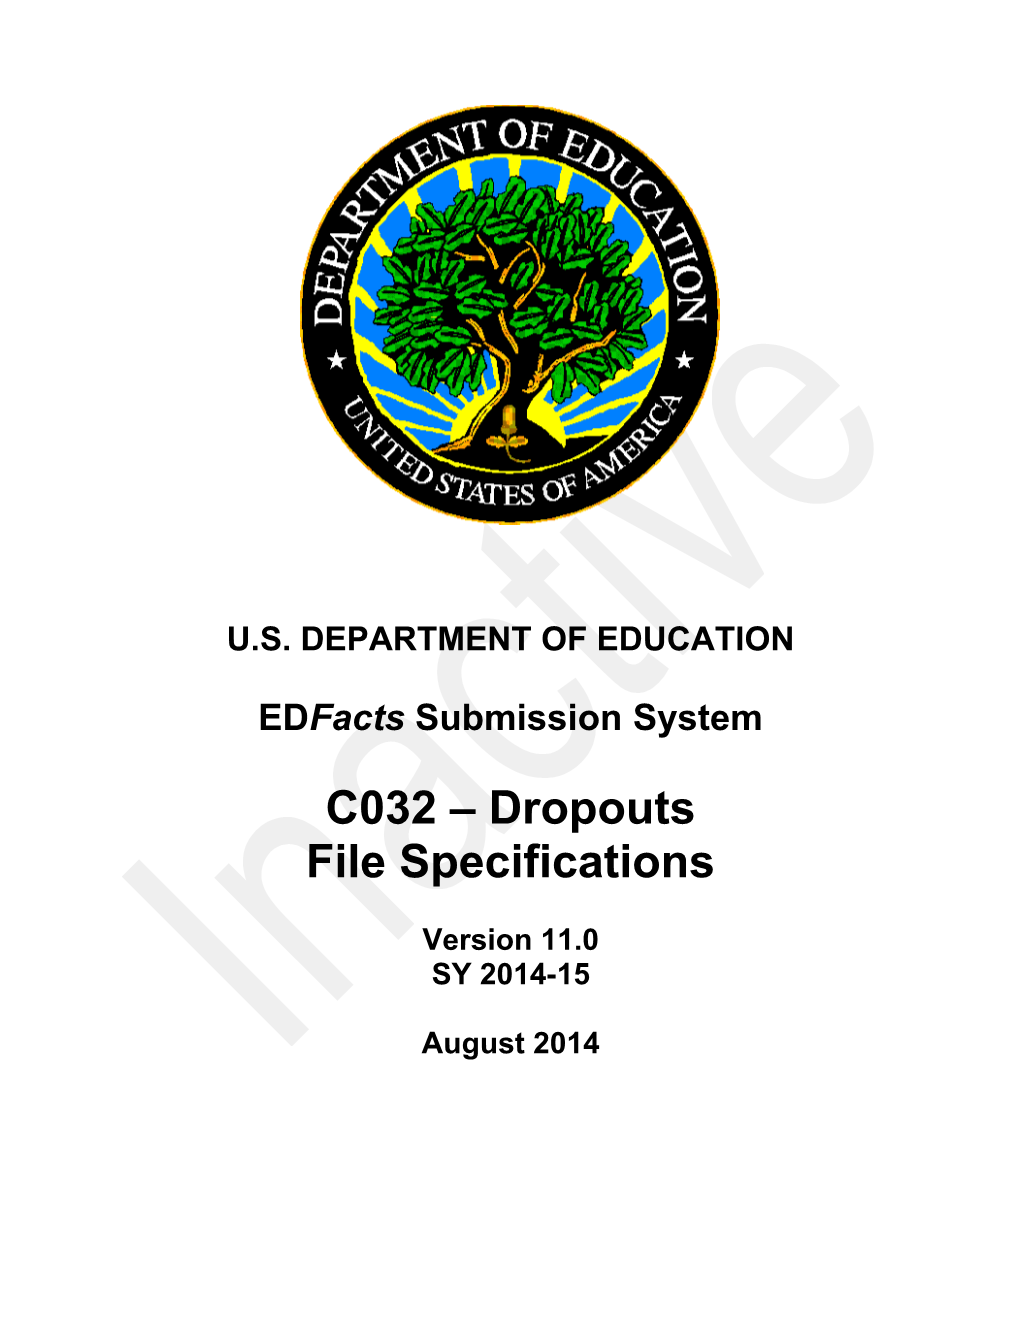 Dropouts File Specifications